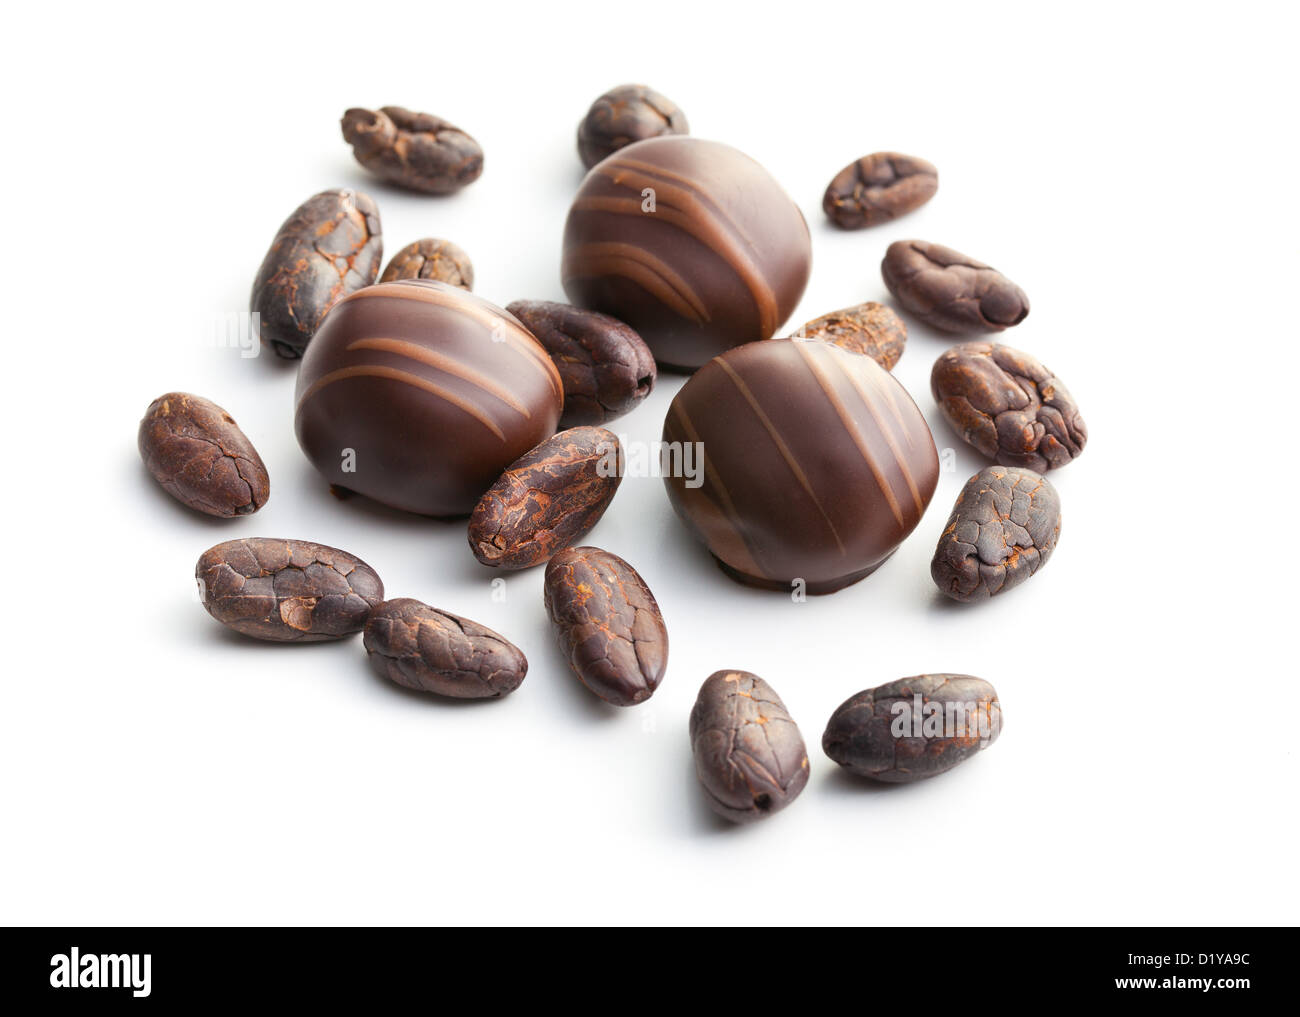 chocolate pralines and cocoa beans on white background Stock Photo